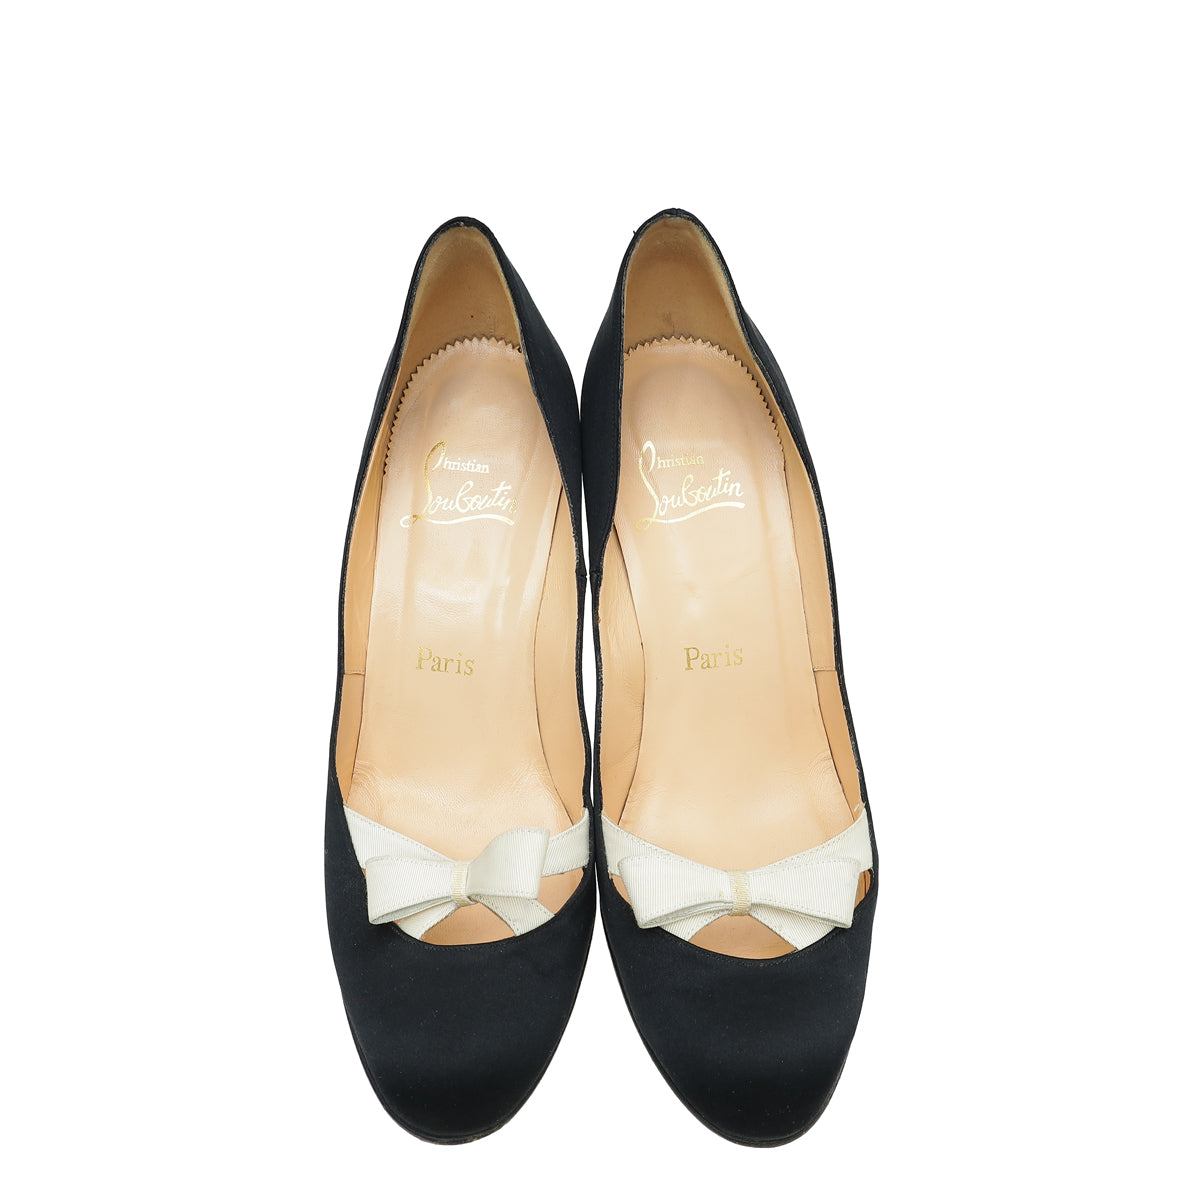 Load image into Gallery viewer, Christian Louboutin Bicolor Satin Bow Pump 40
